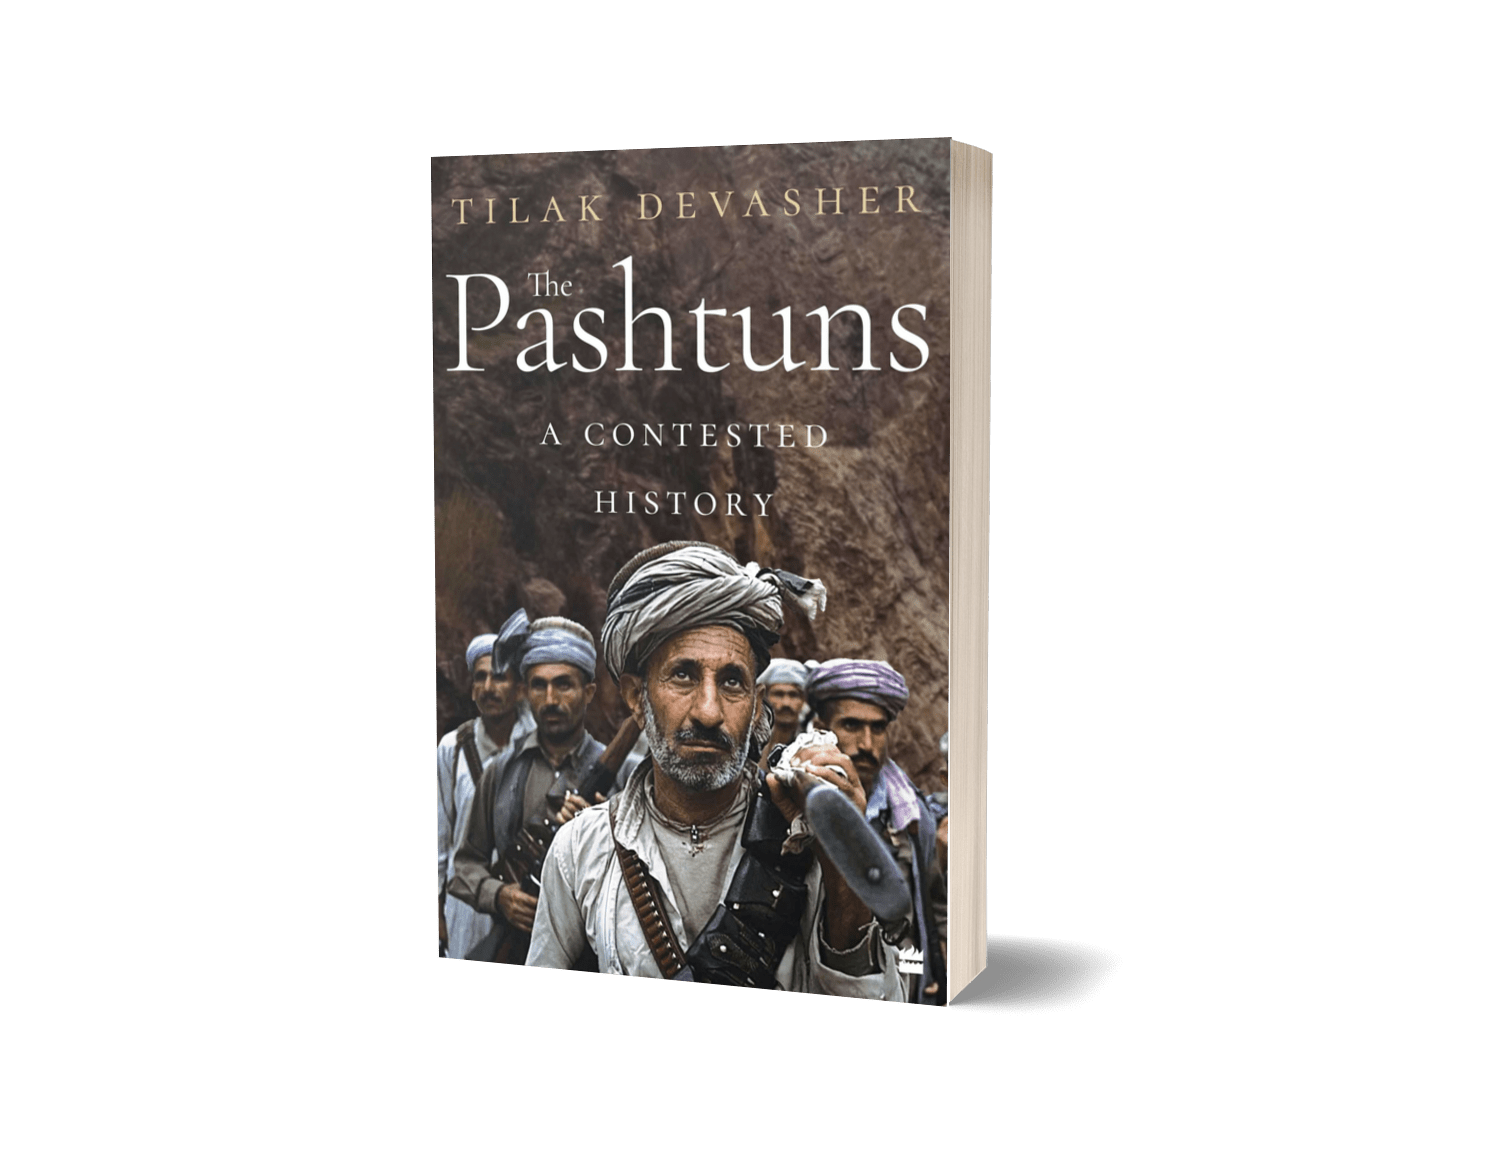 The Pashtuns A Contest History By Tilak Devasher